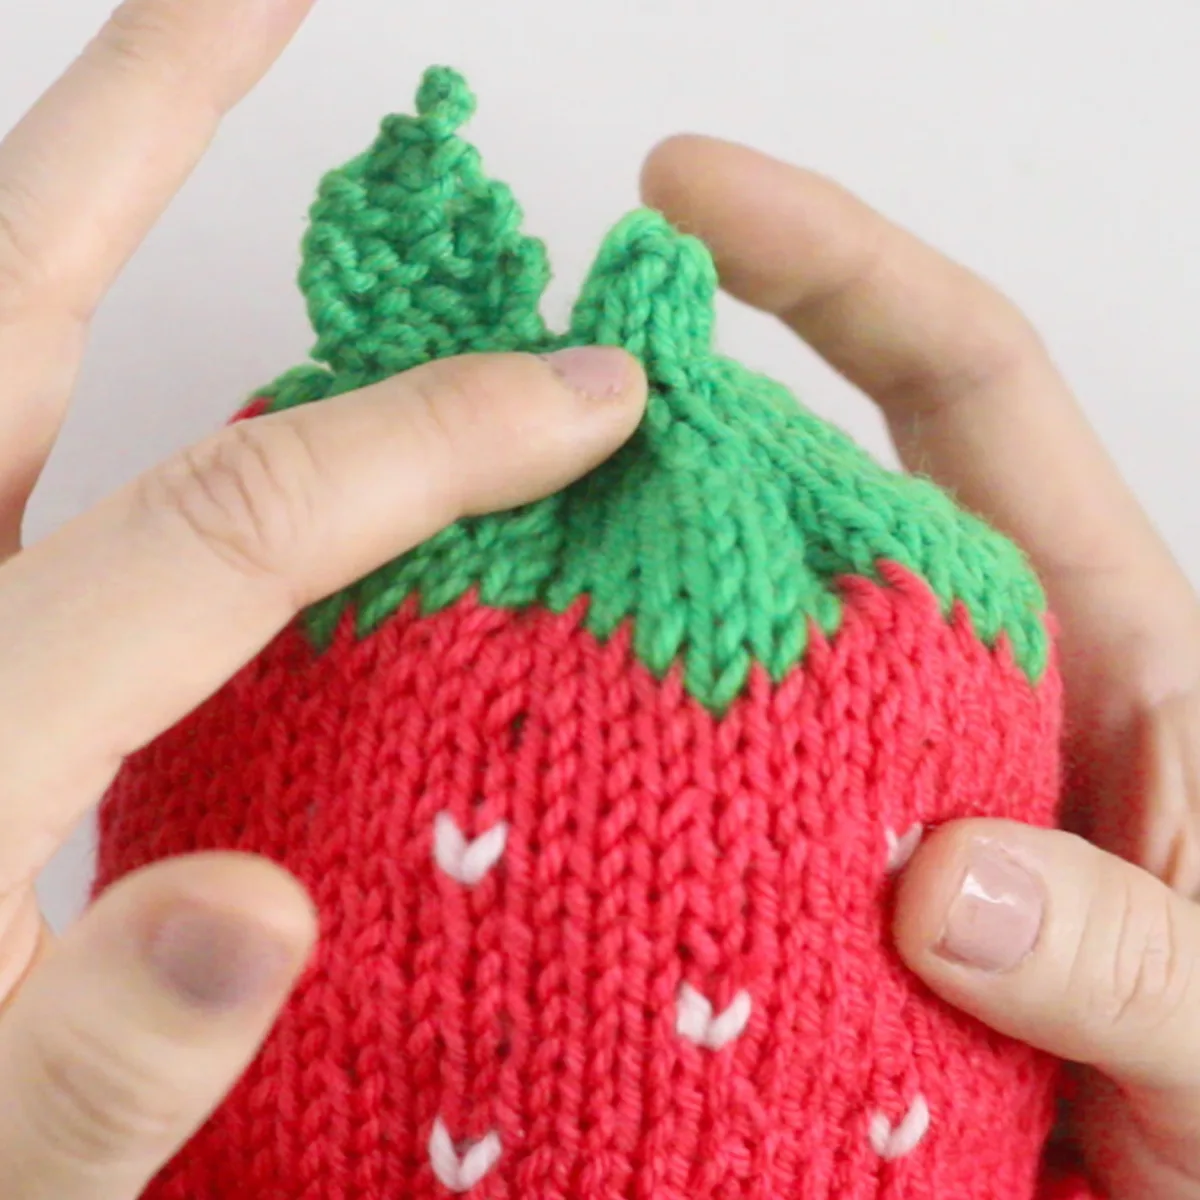 Knitting process of the strawberry baby hat with hands pointing out the top leaf and stem area.